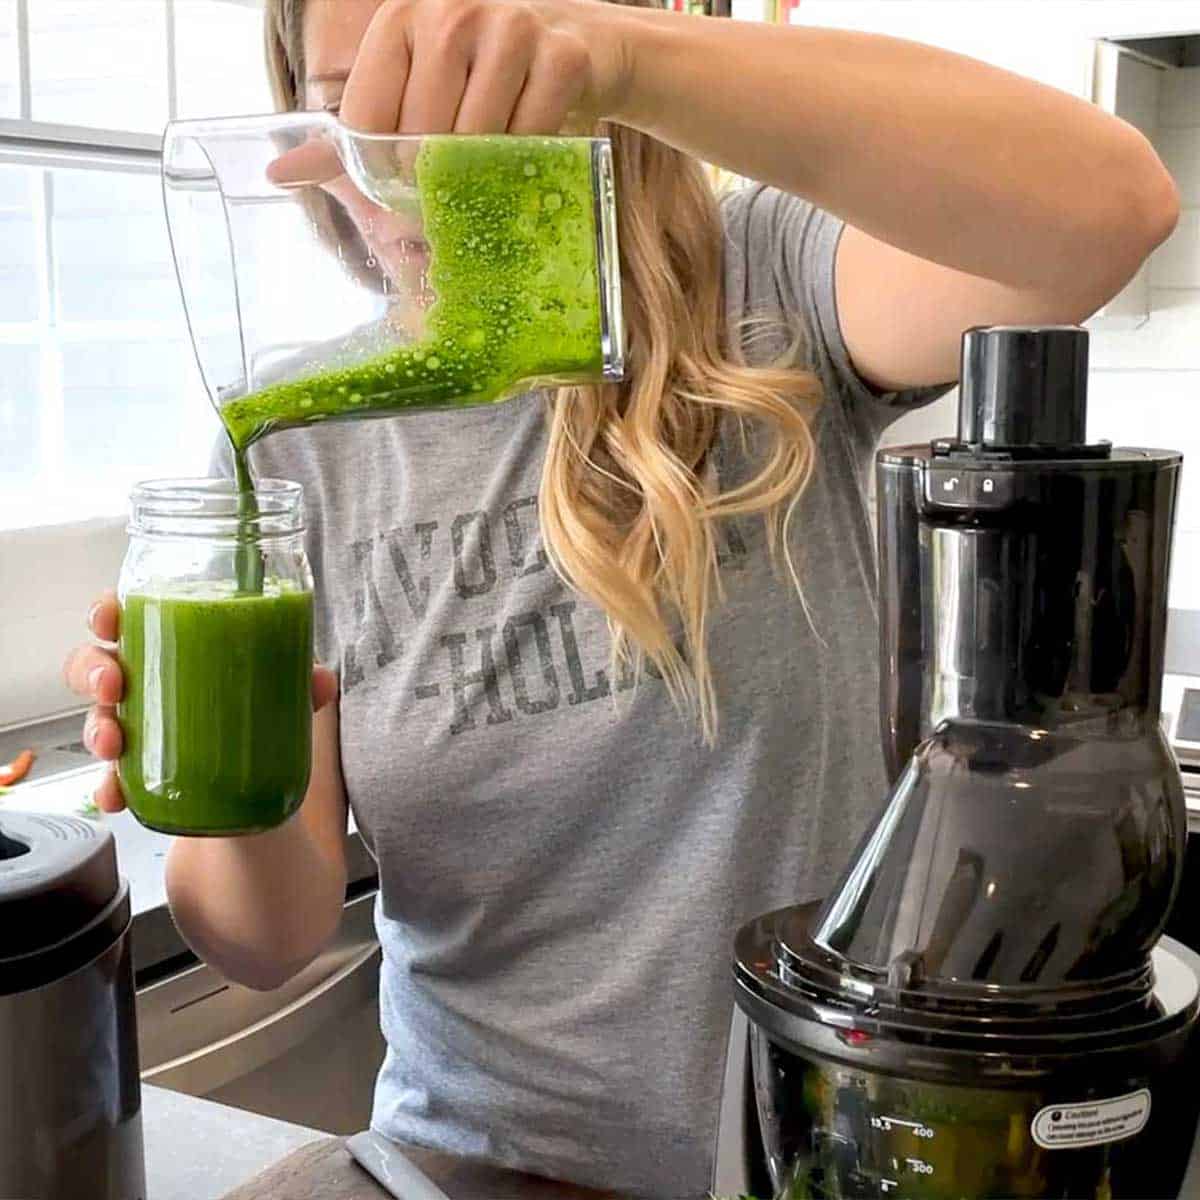 Vibrate composite Celsius Juicer vs Blender: Which is Better? - Simple Green Smoothies